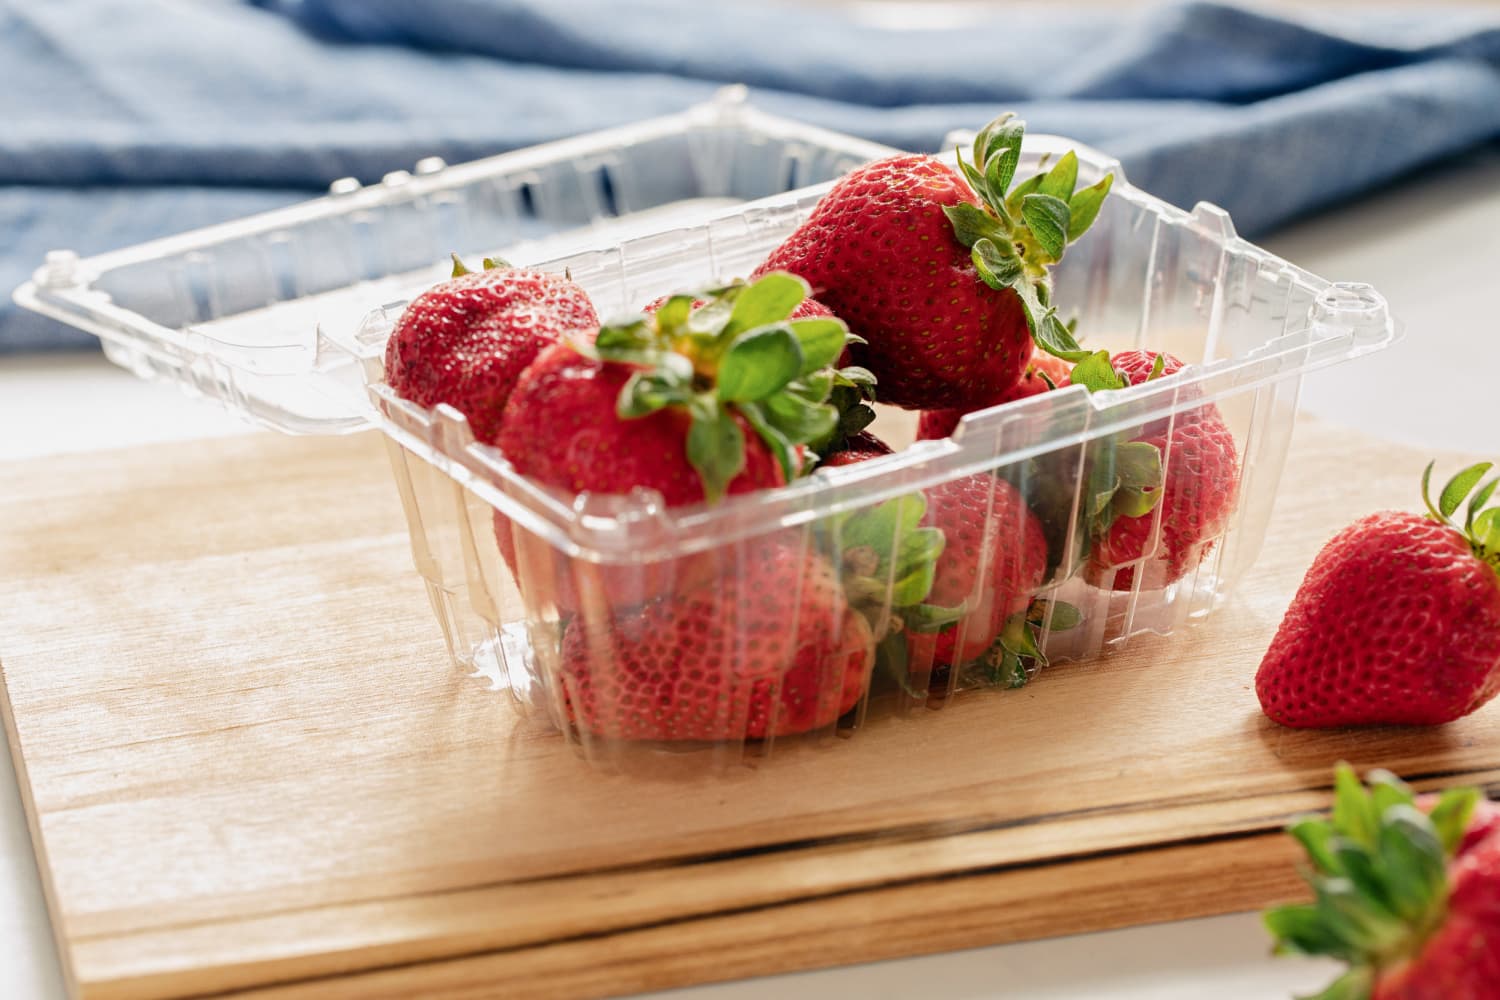 I Absolutely Love This Affordable Strawberry Huller and Slicer from